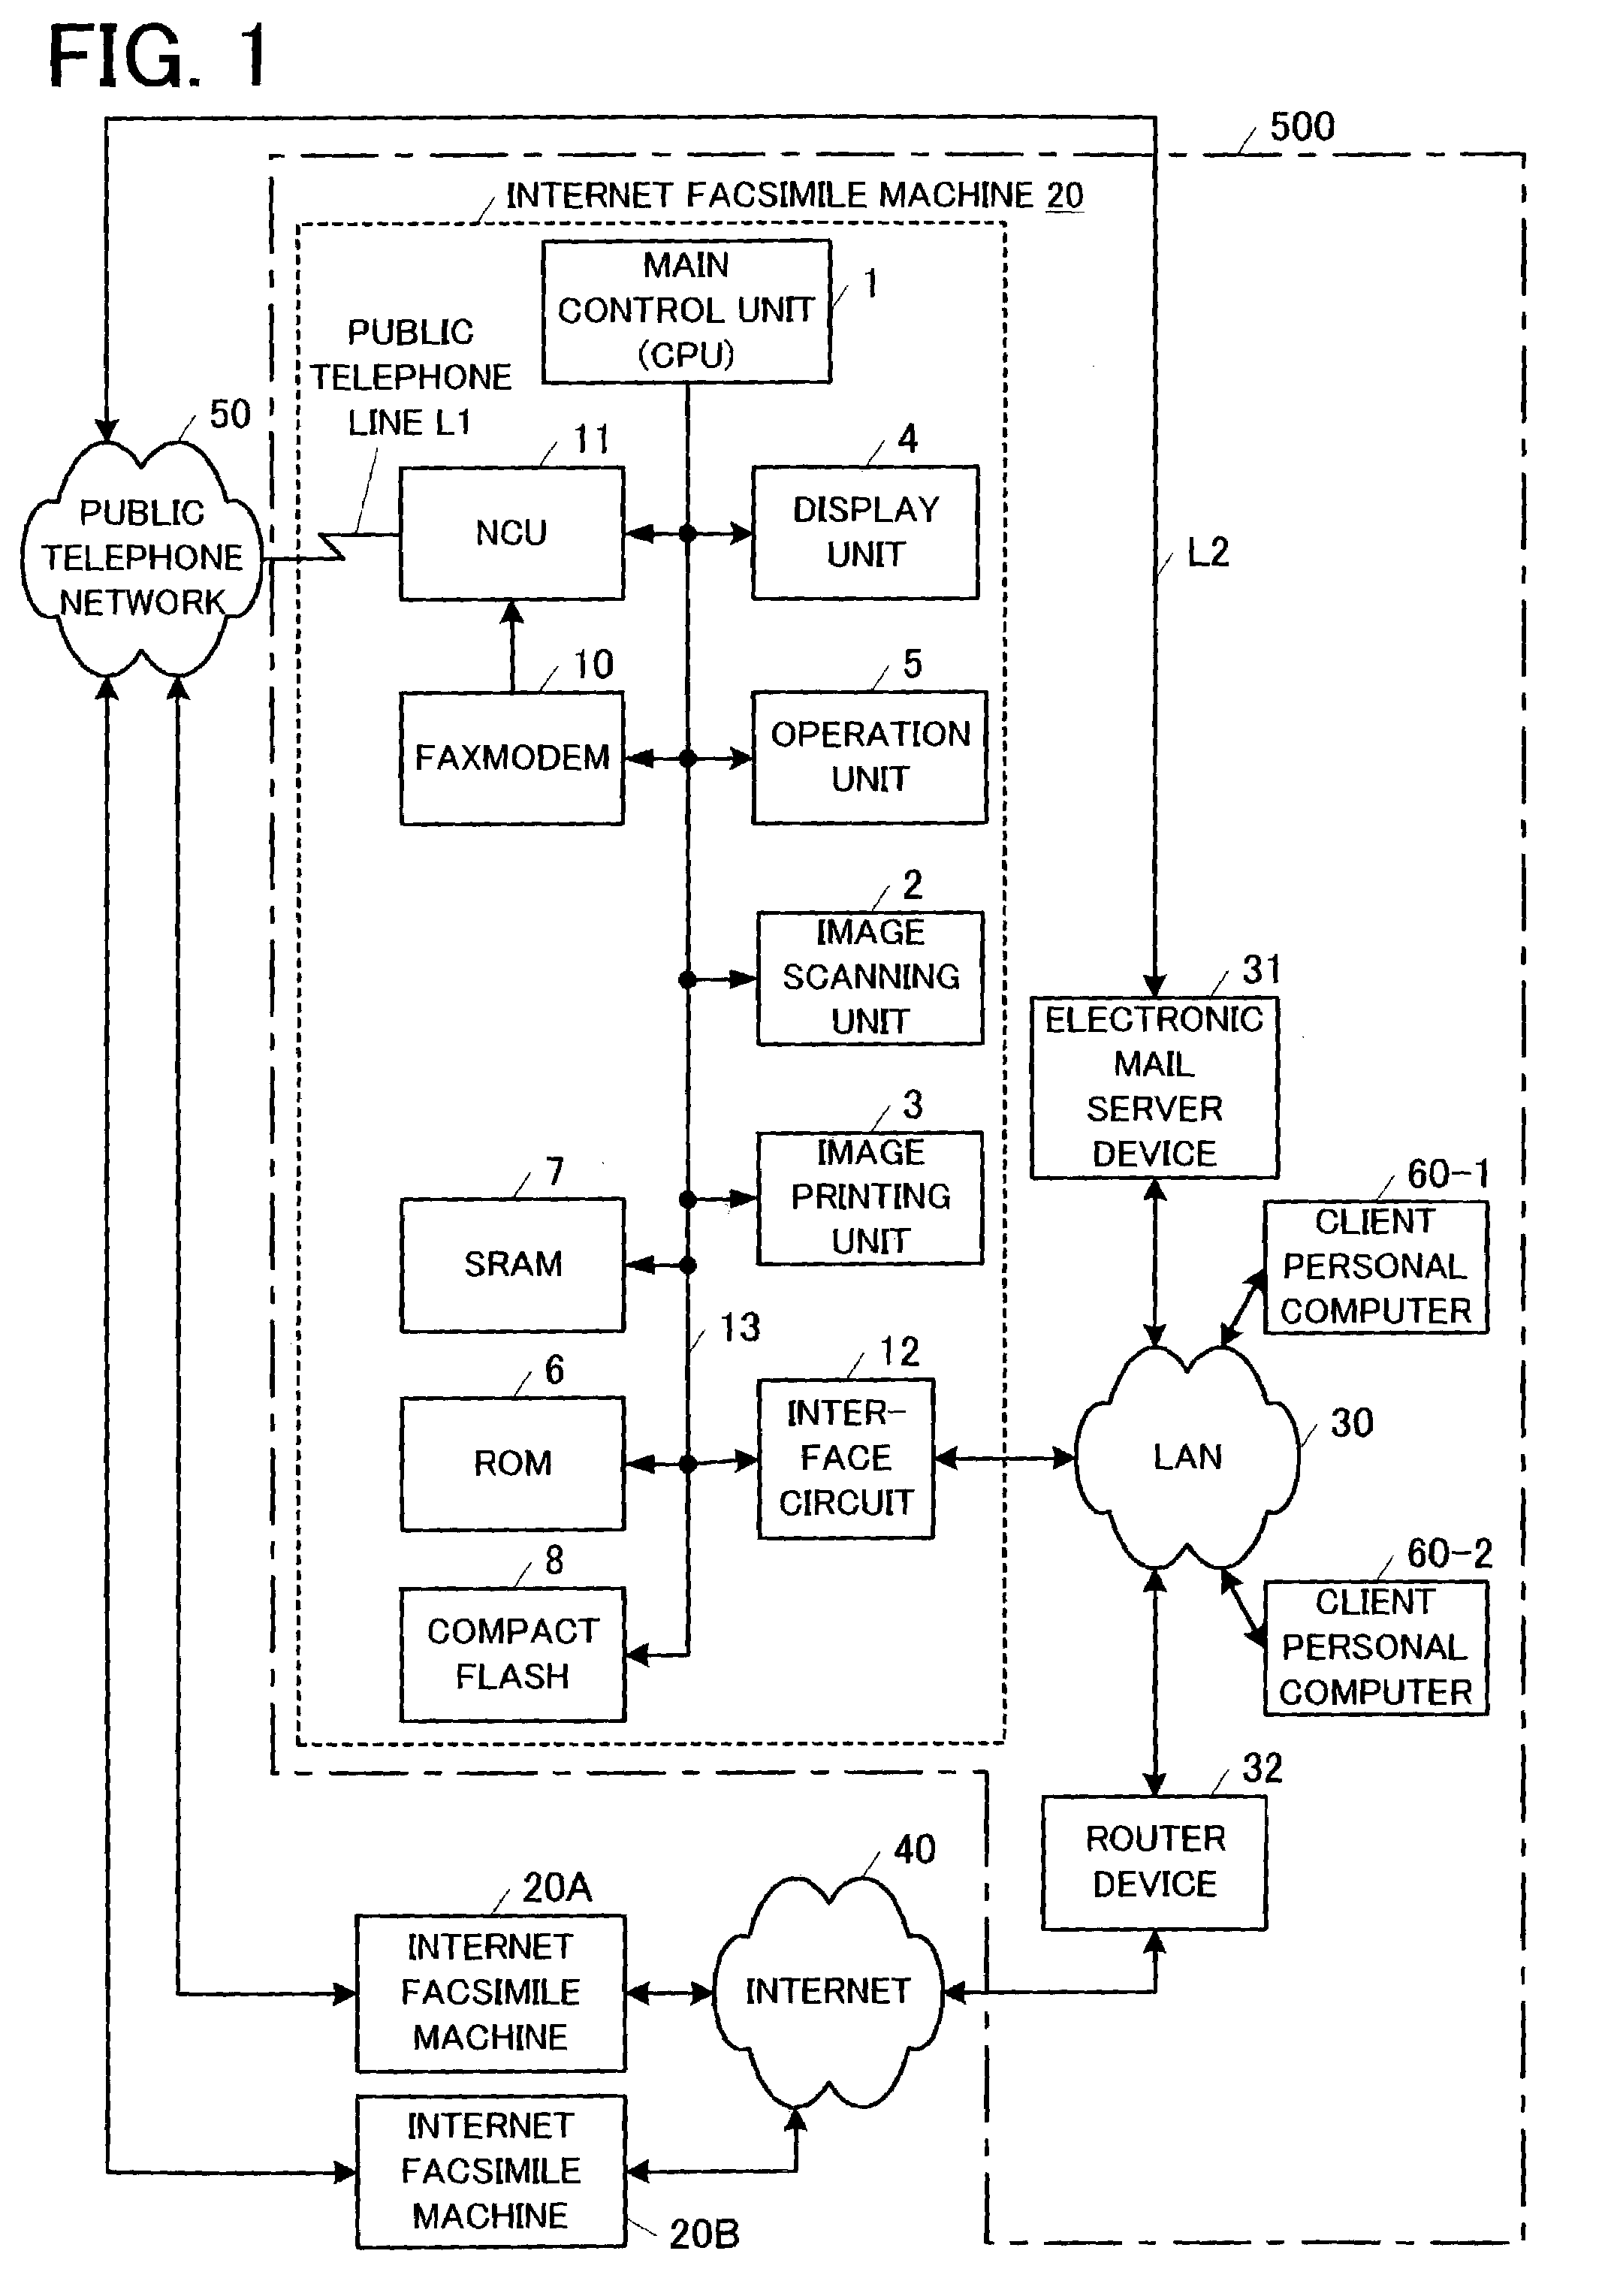 Electronic mail server with facsimile transmission on electronic mail transmission failure